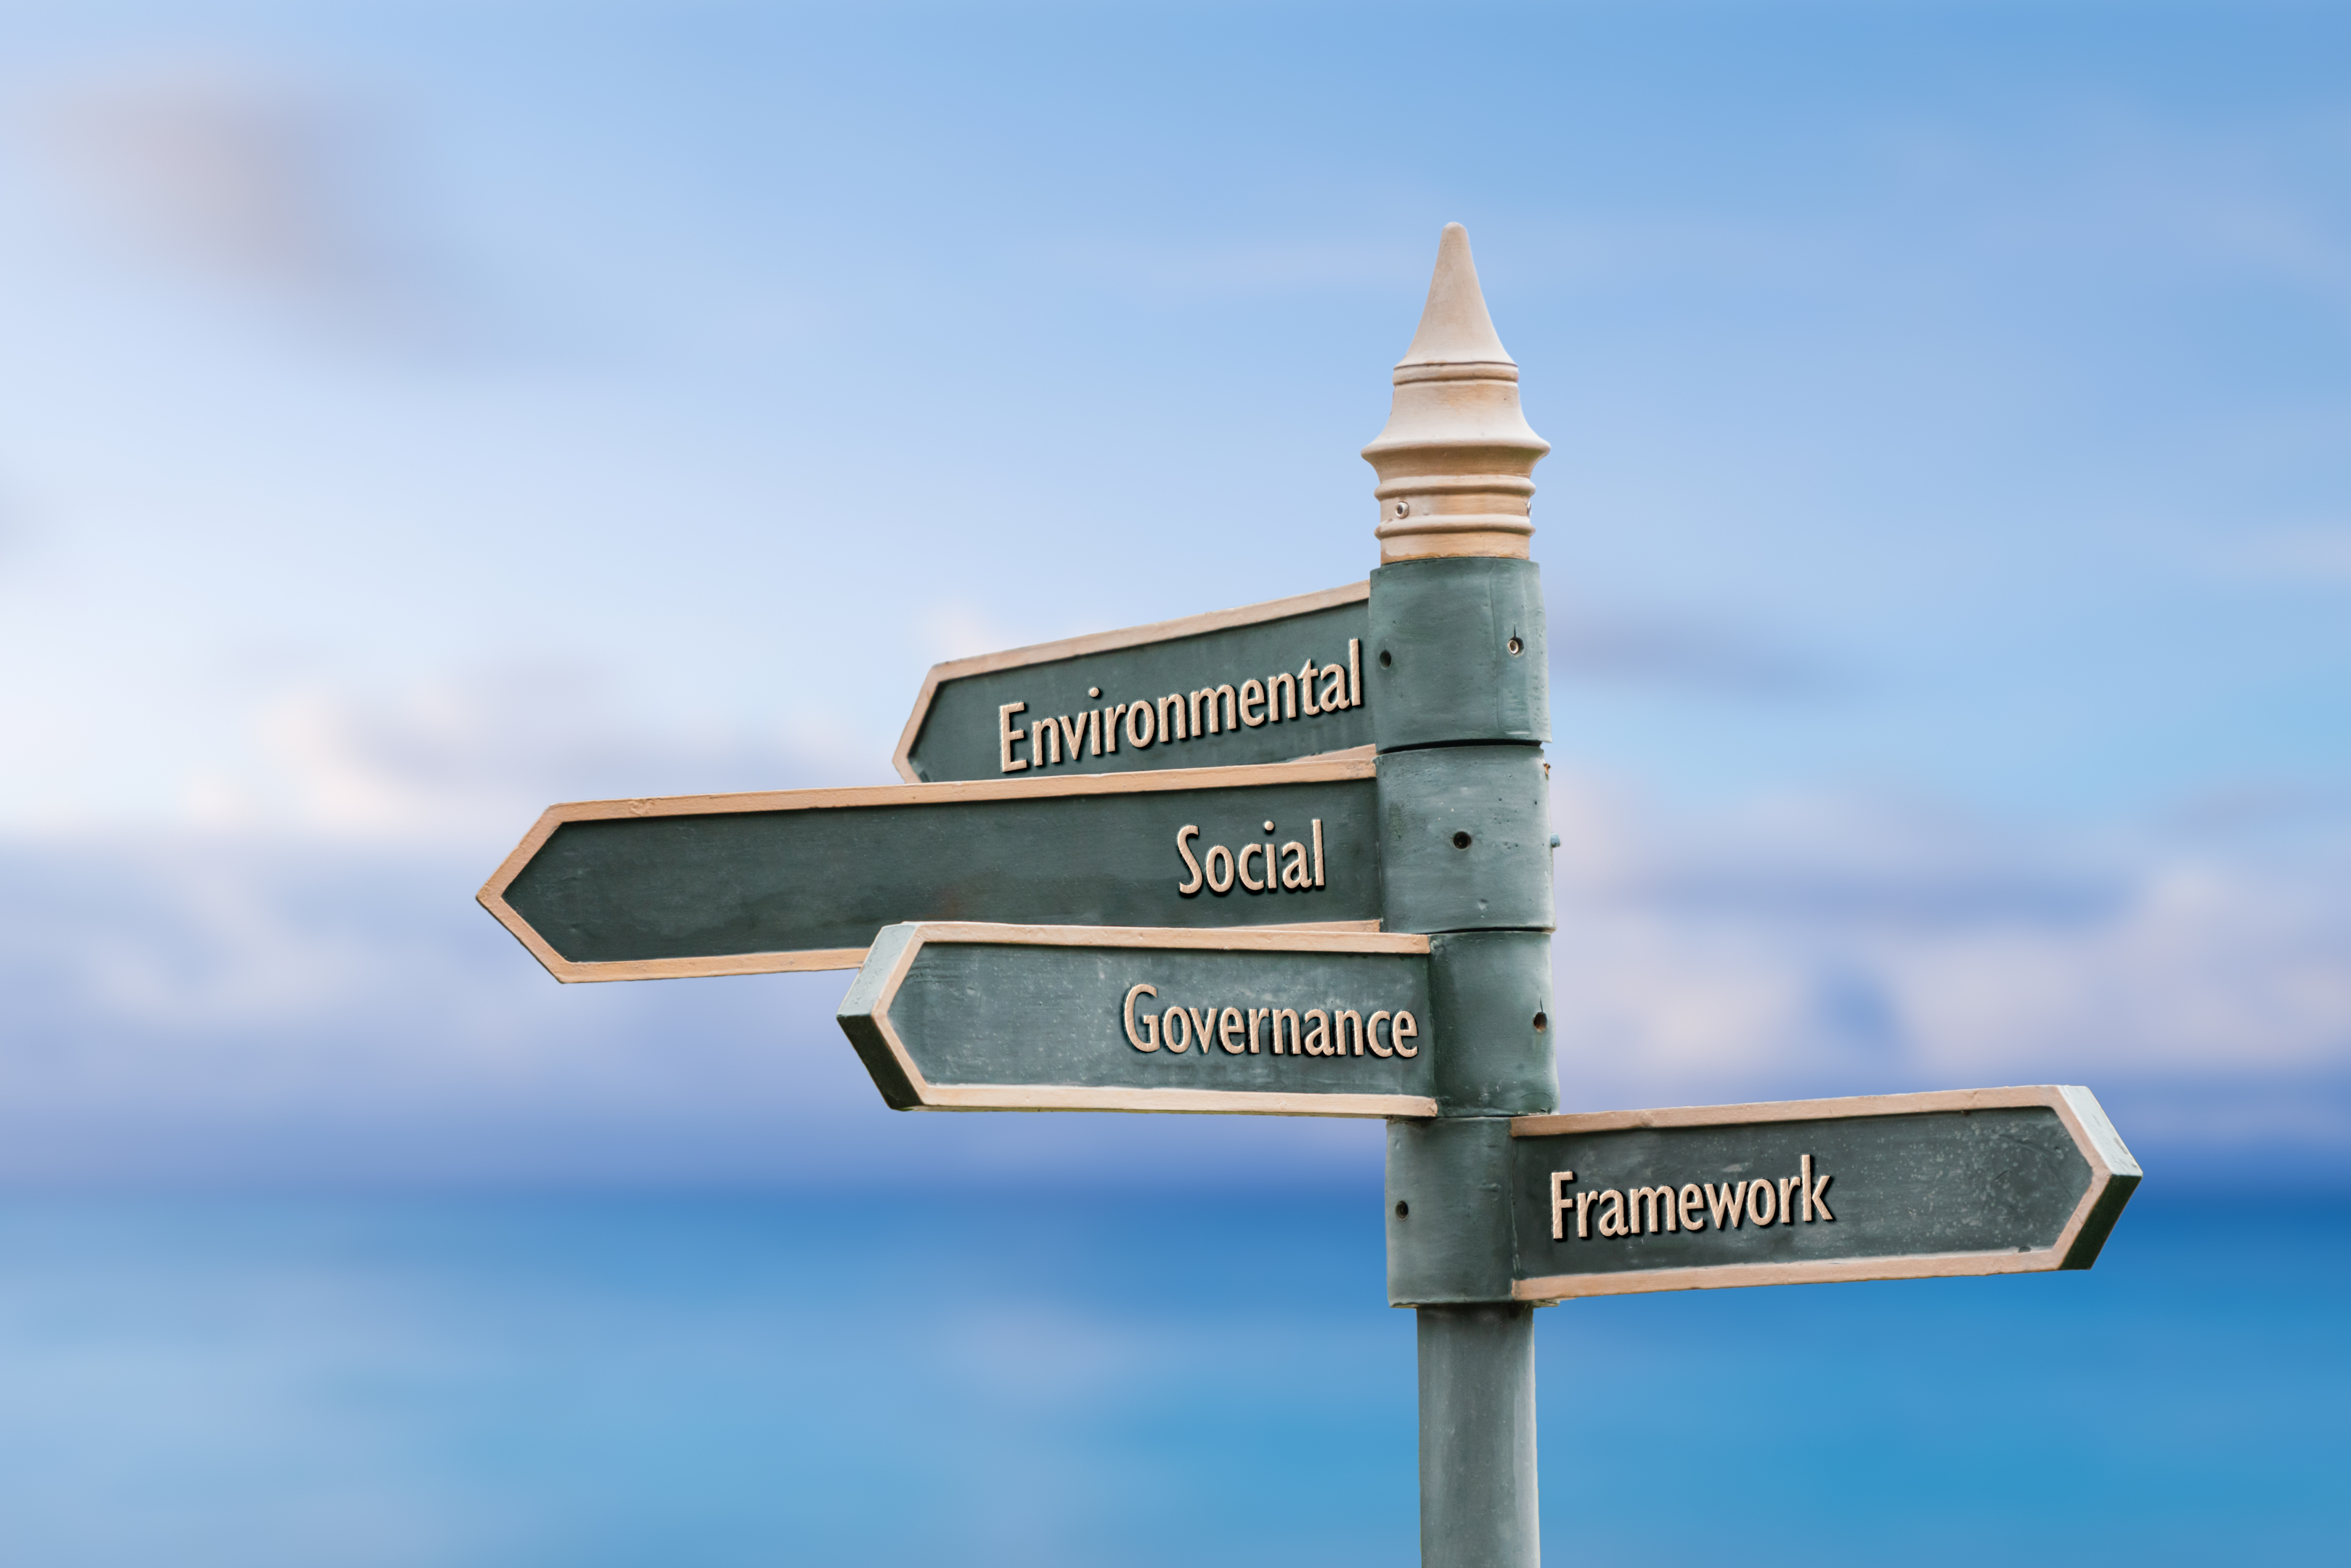 Arrows that point in four different directions: Environmental, Social, Governance and Framework